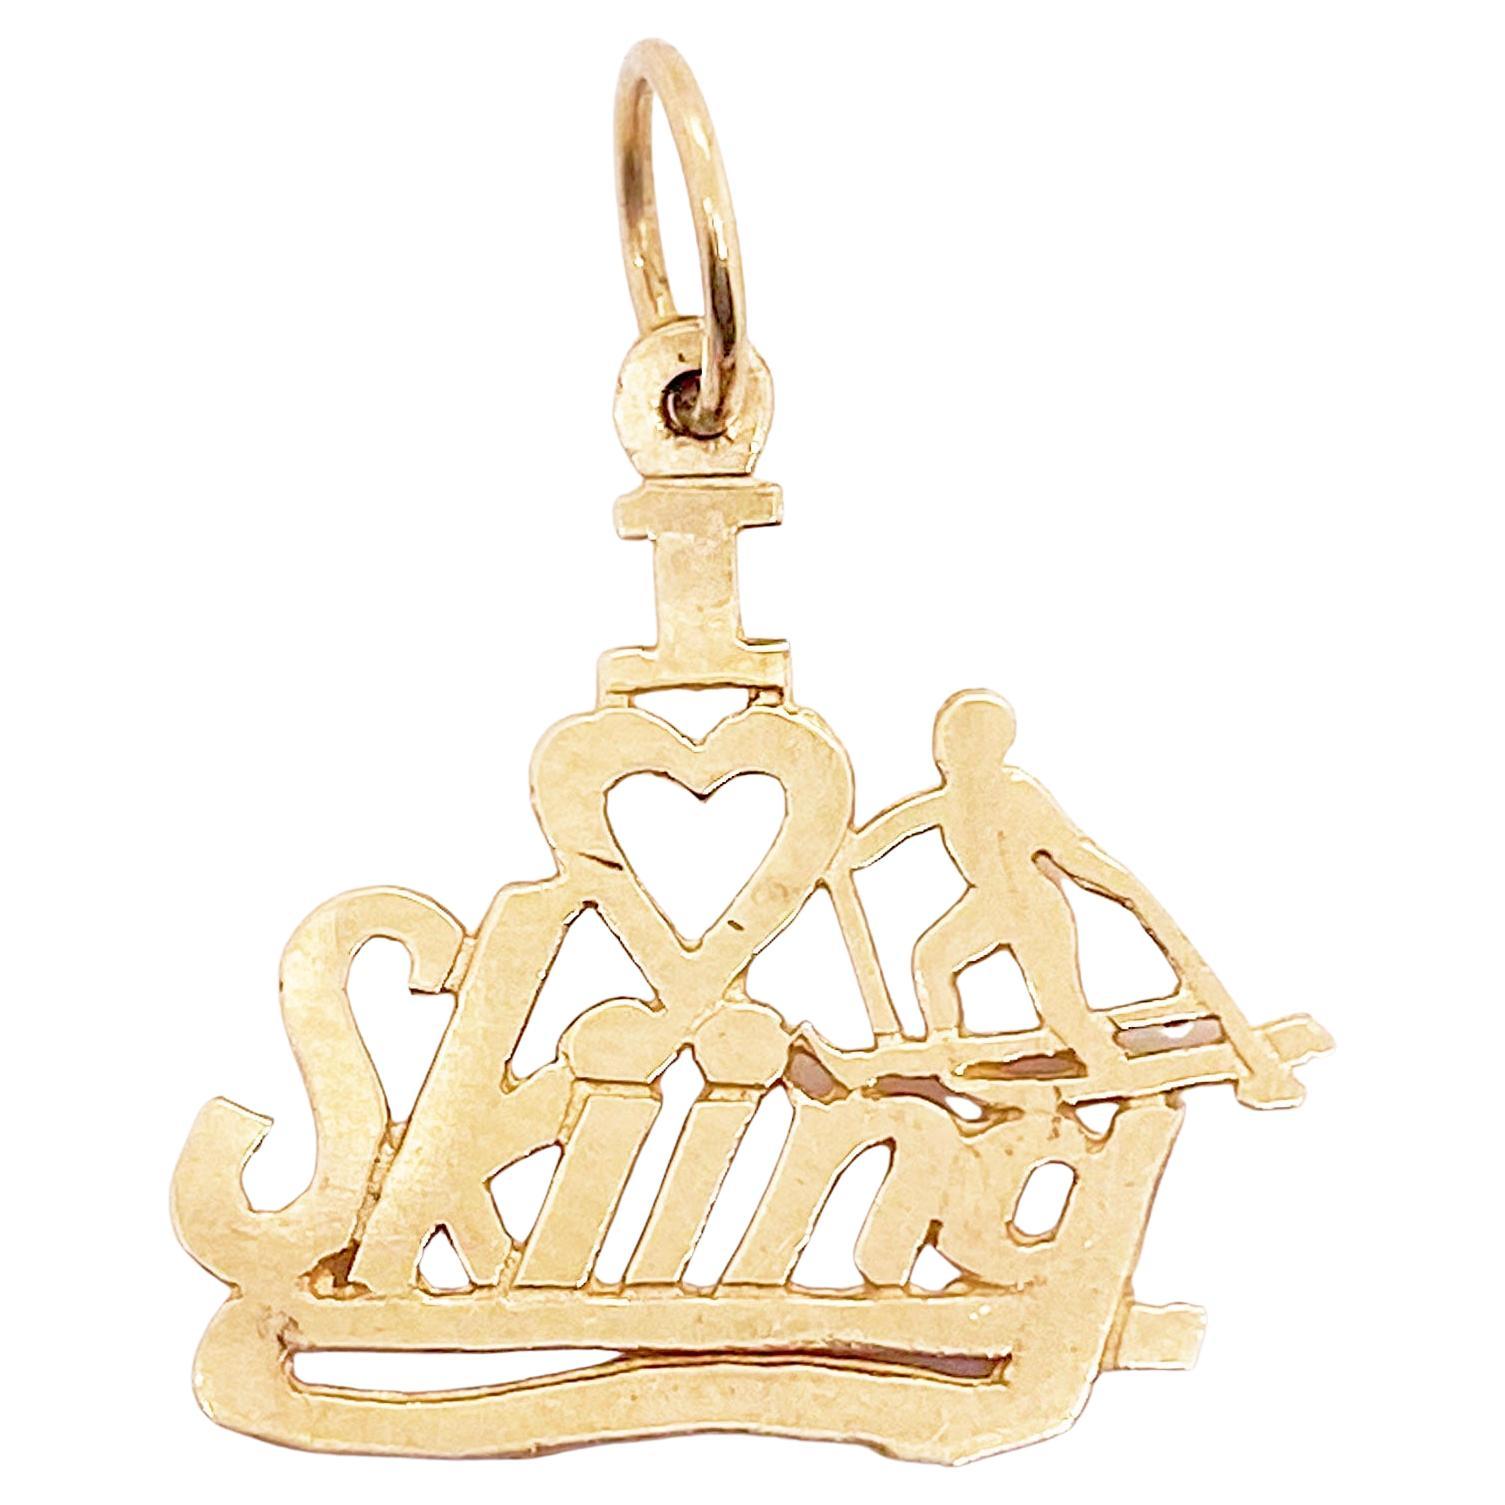 Love Skiing Charm or Pendant, 14K Yellow Gold, Stamped Out, I Love Skiing Charm